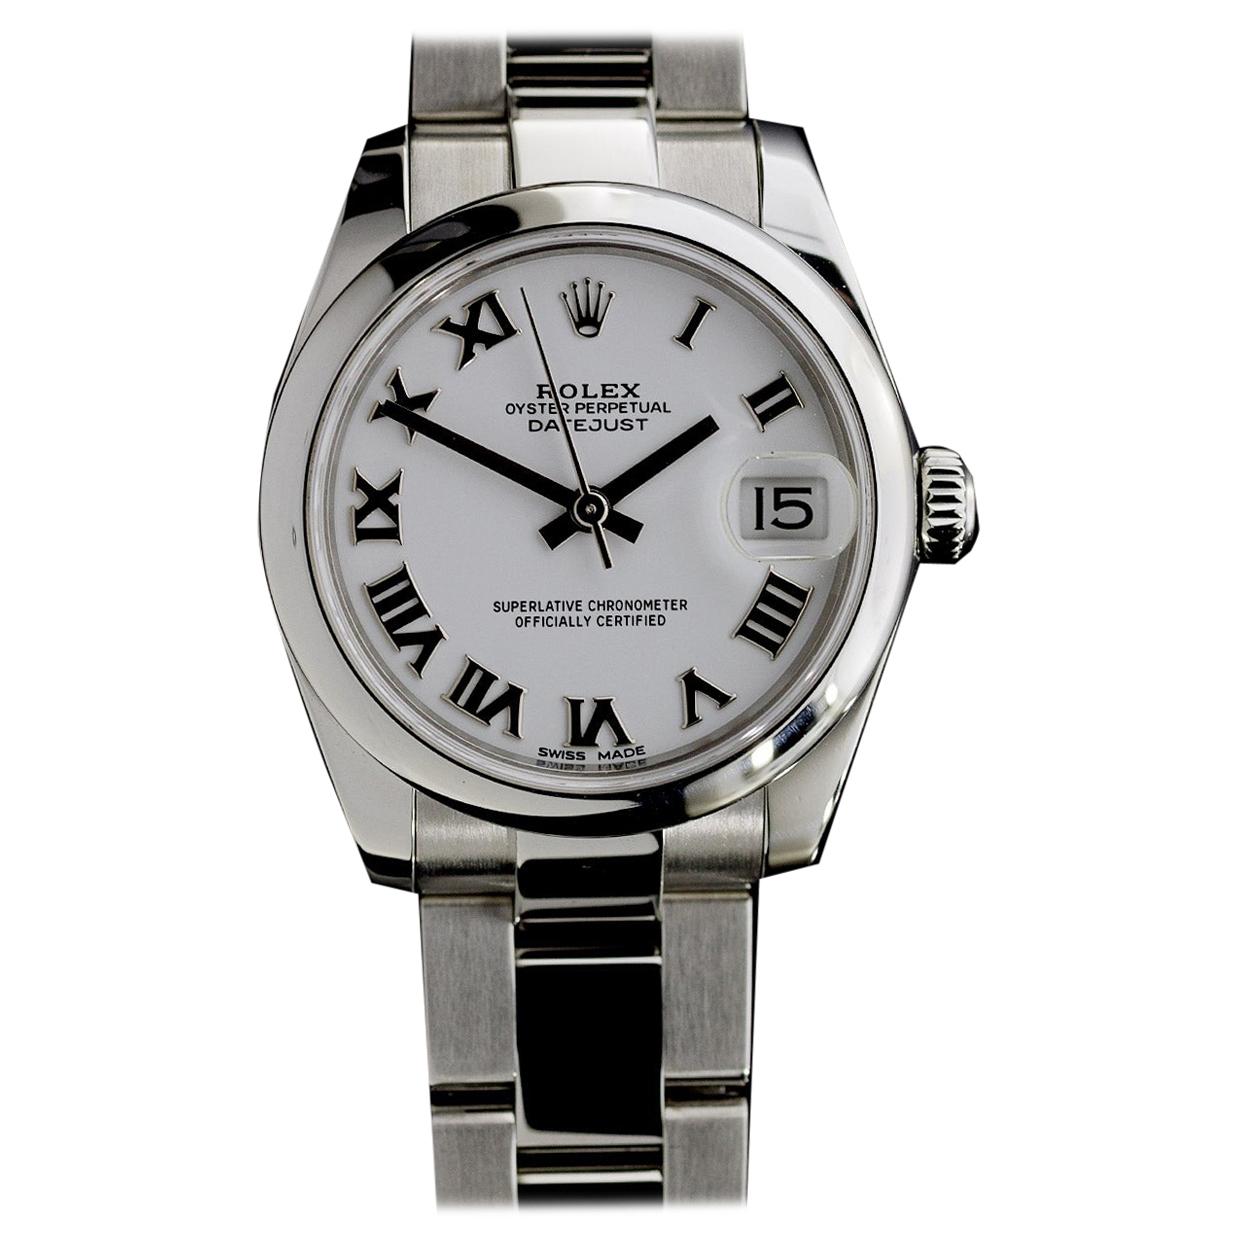 Rolex Datejust Stainless Steel Watch For Sale